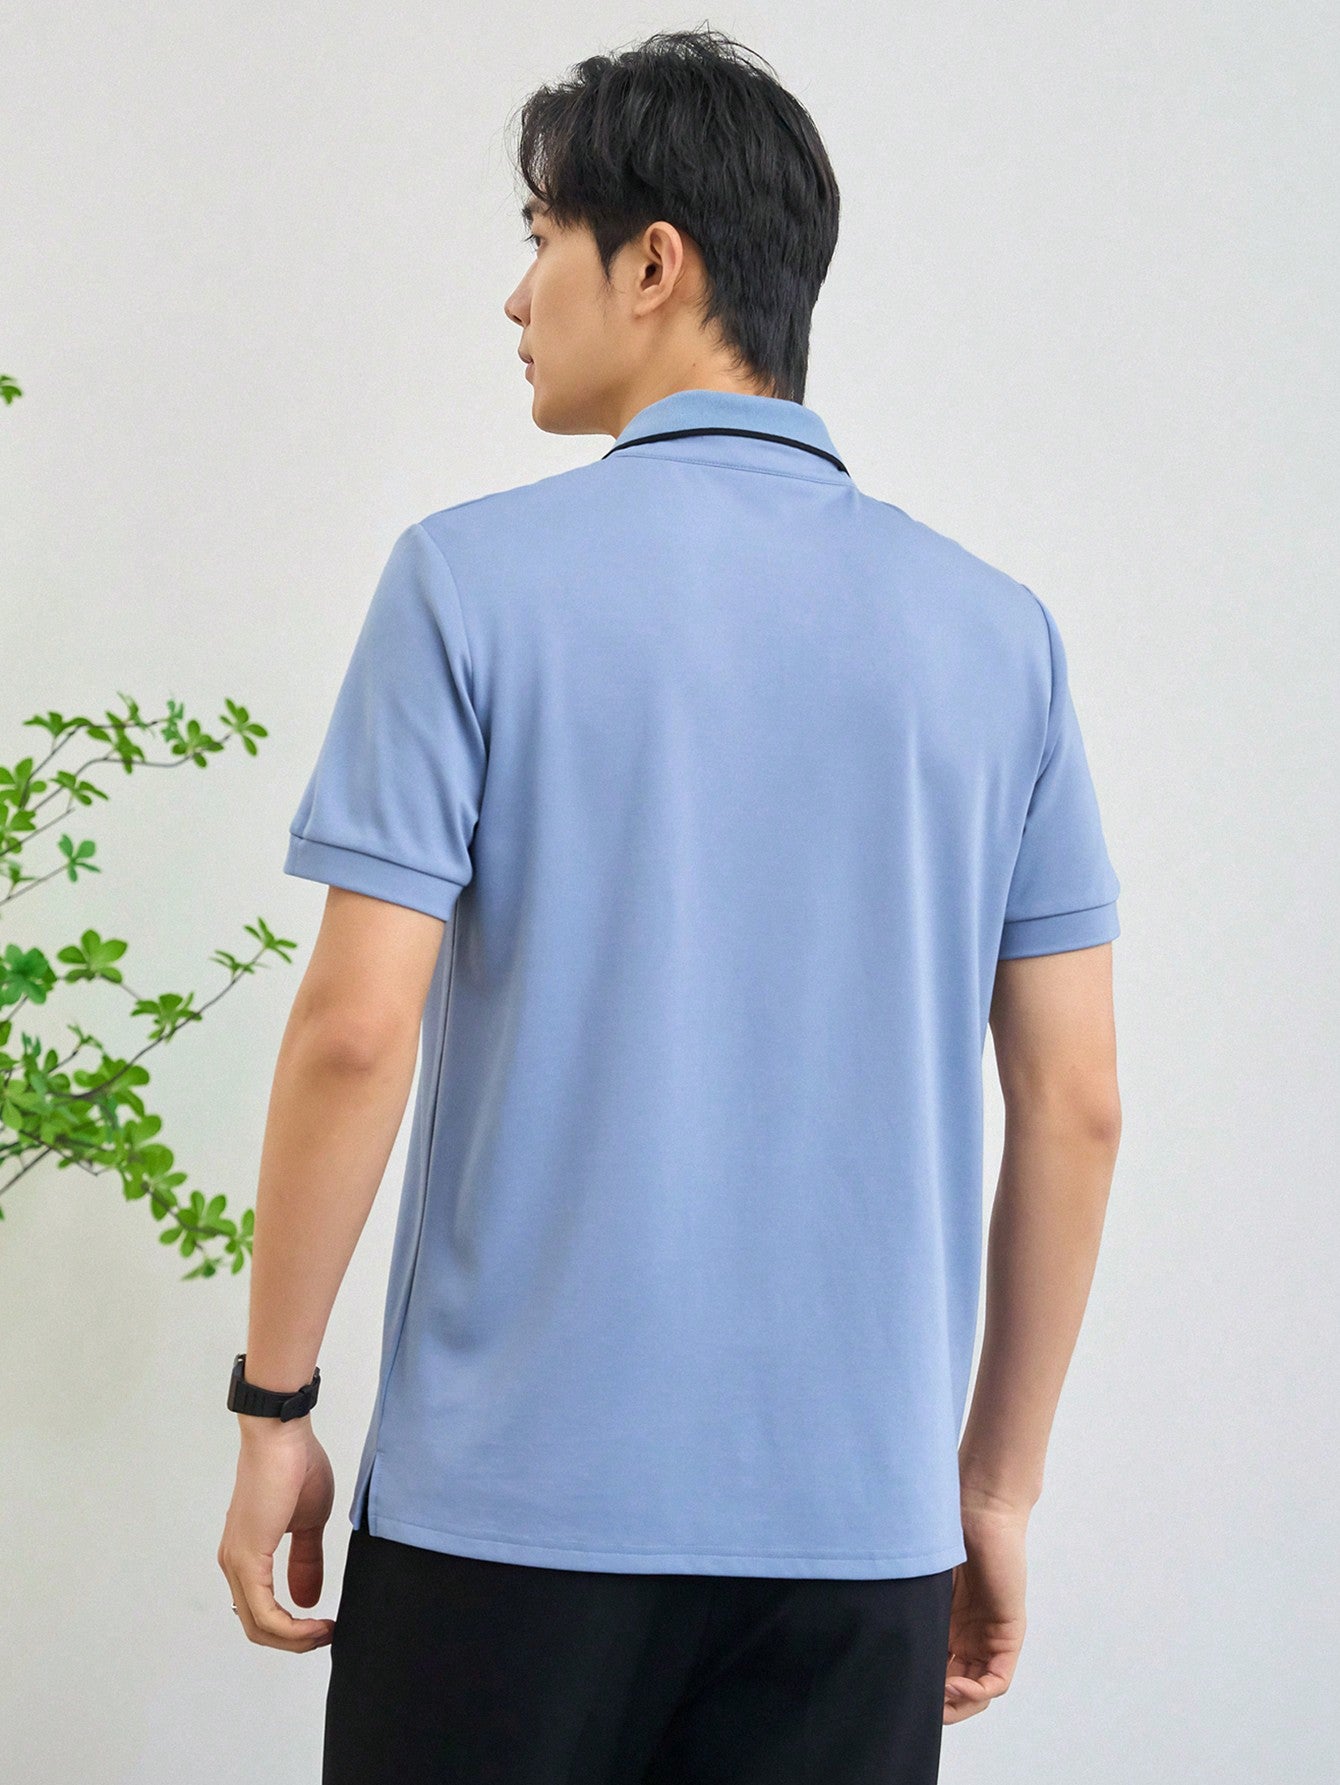 Men's Summer Polo Shirt With Letter Embroidery